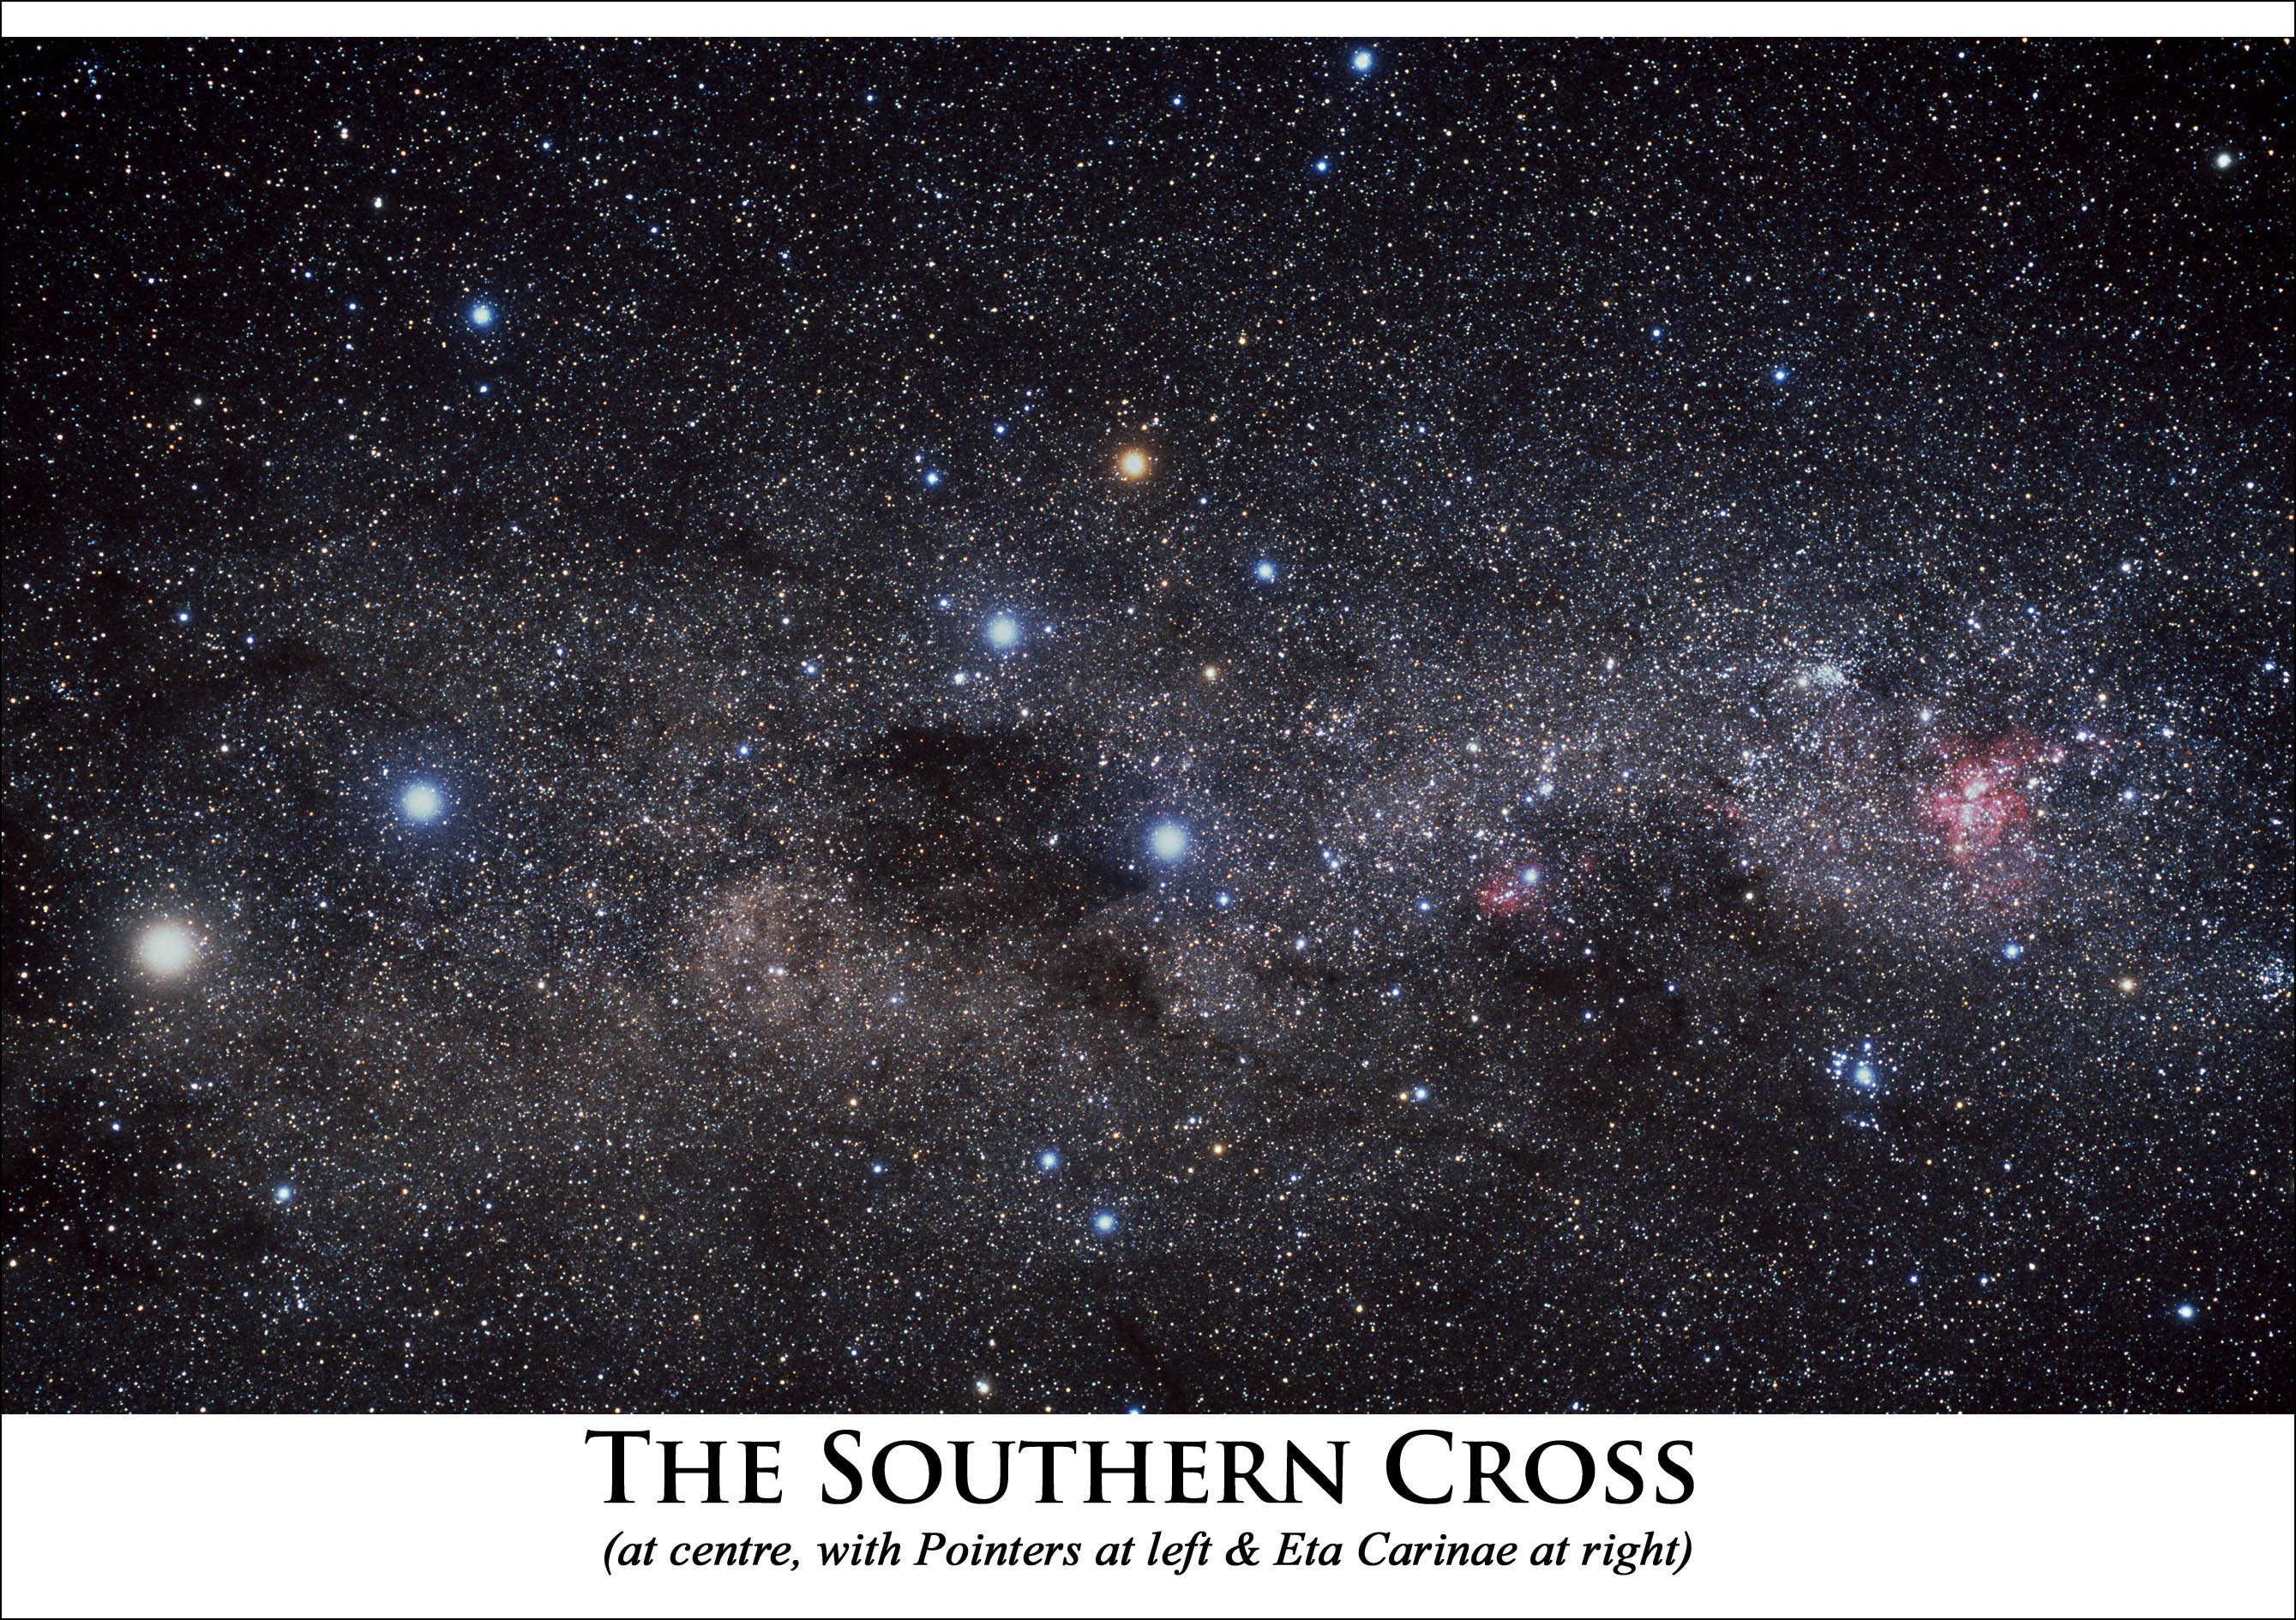 Astrovisuals Southern Cross Postcard